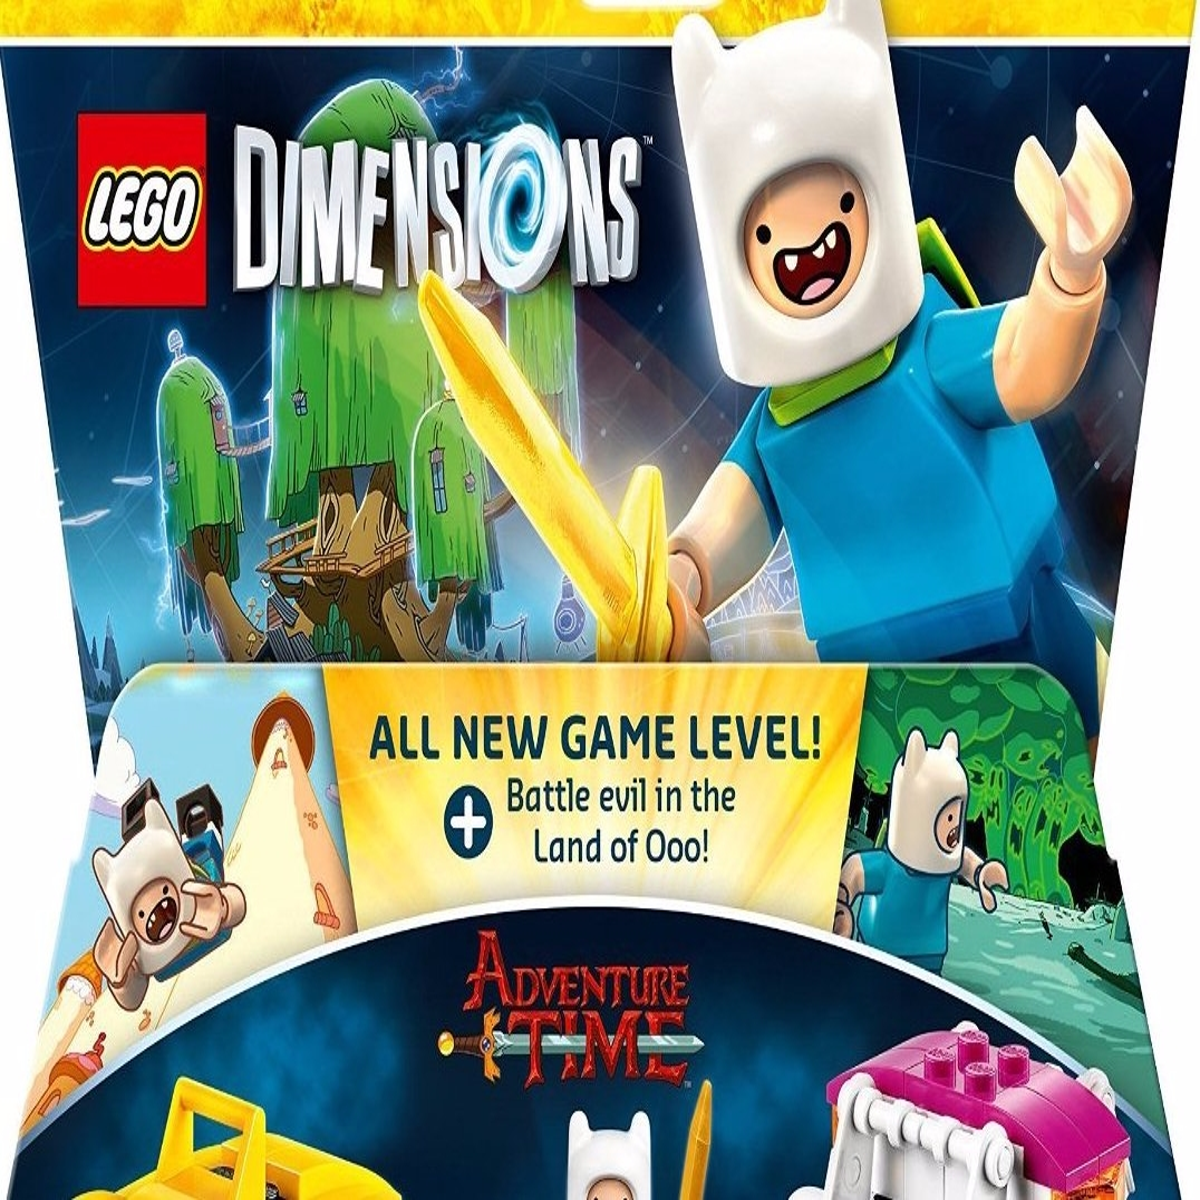 2016 LEGO Dimensions Framed Print Ad/Poster Sonic Adventure Time